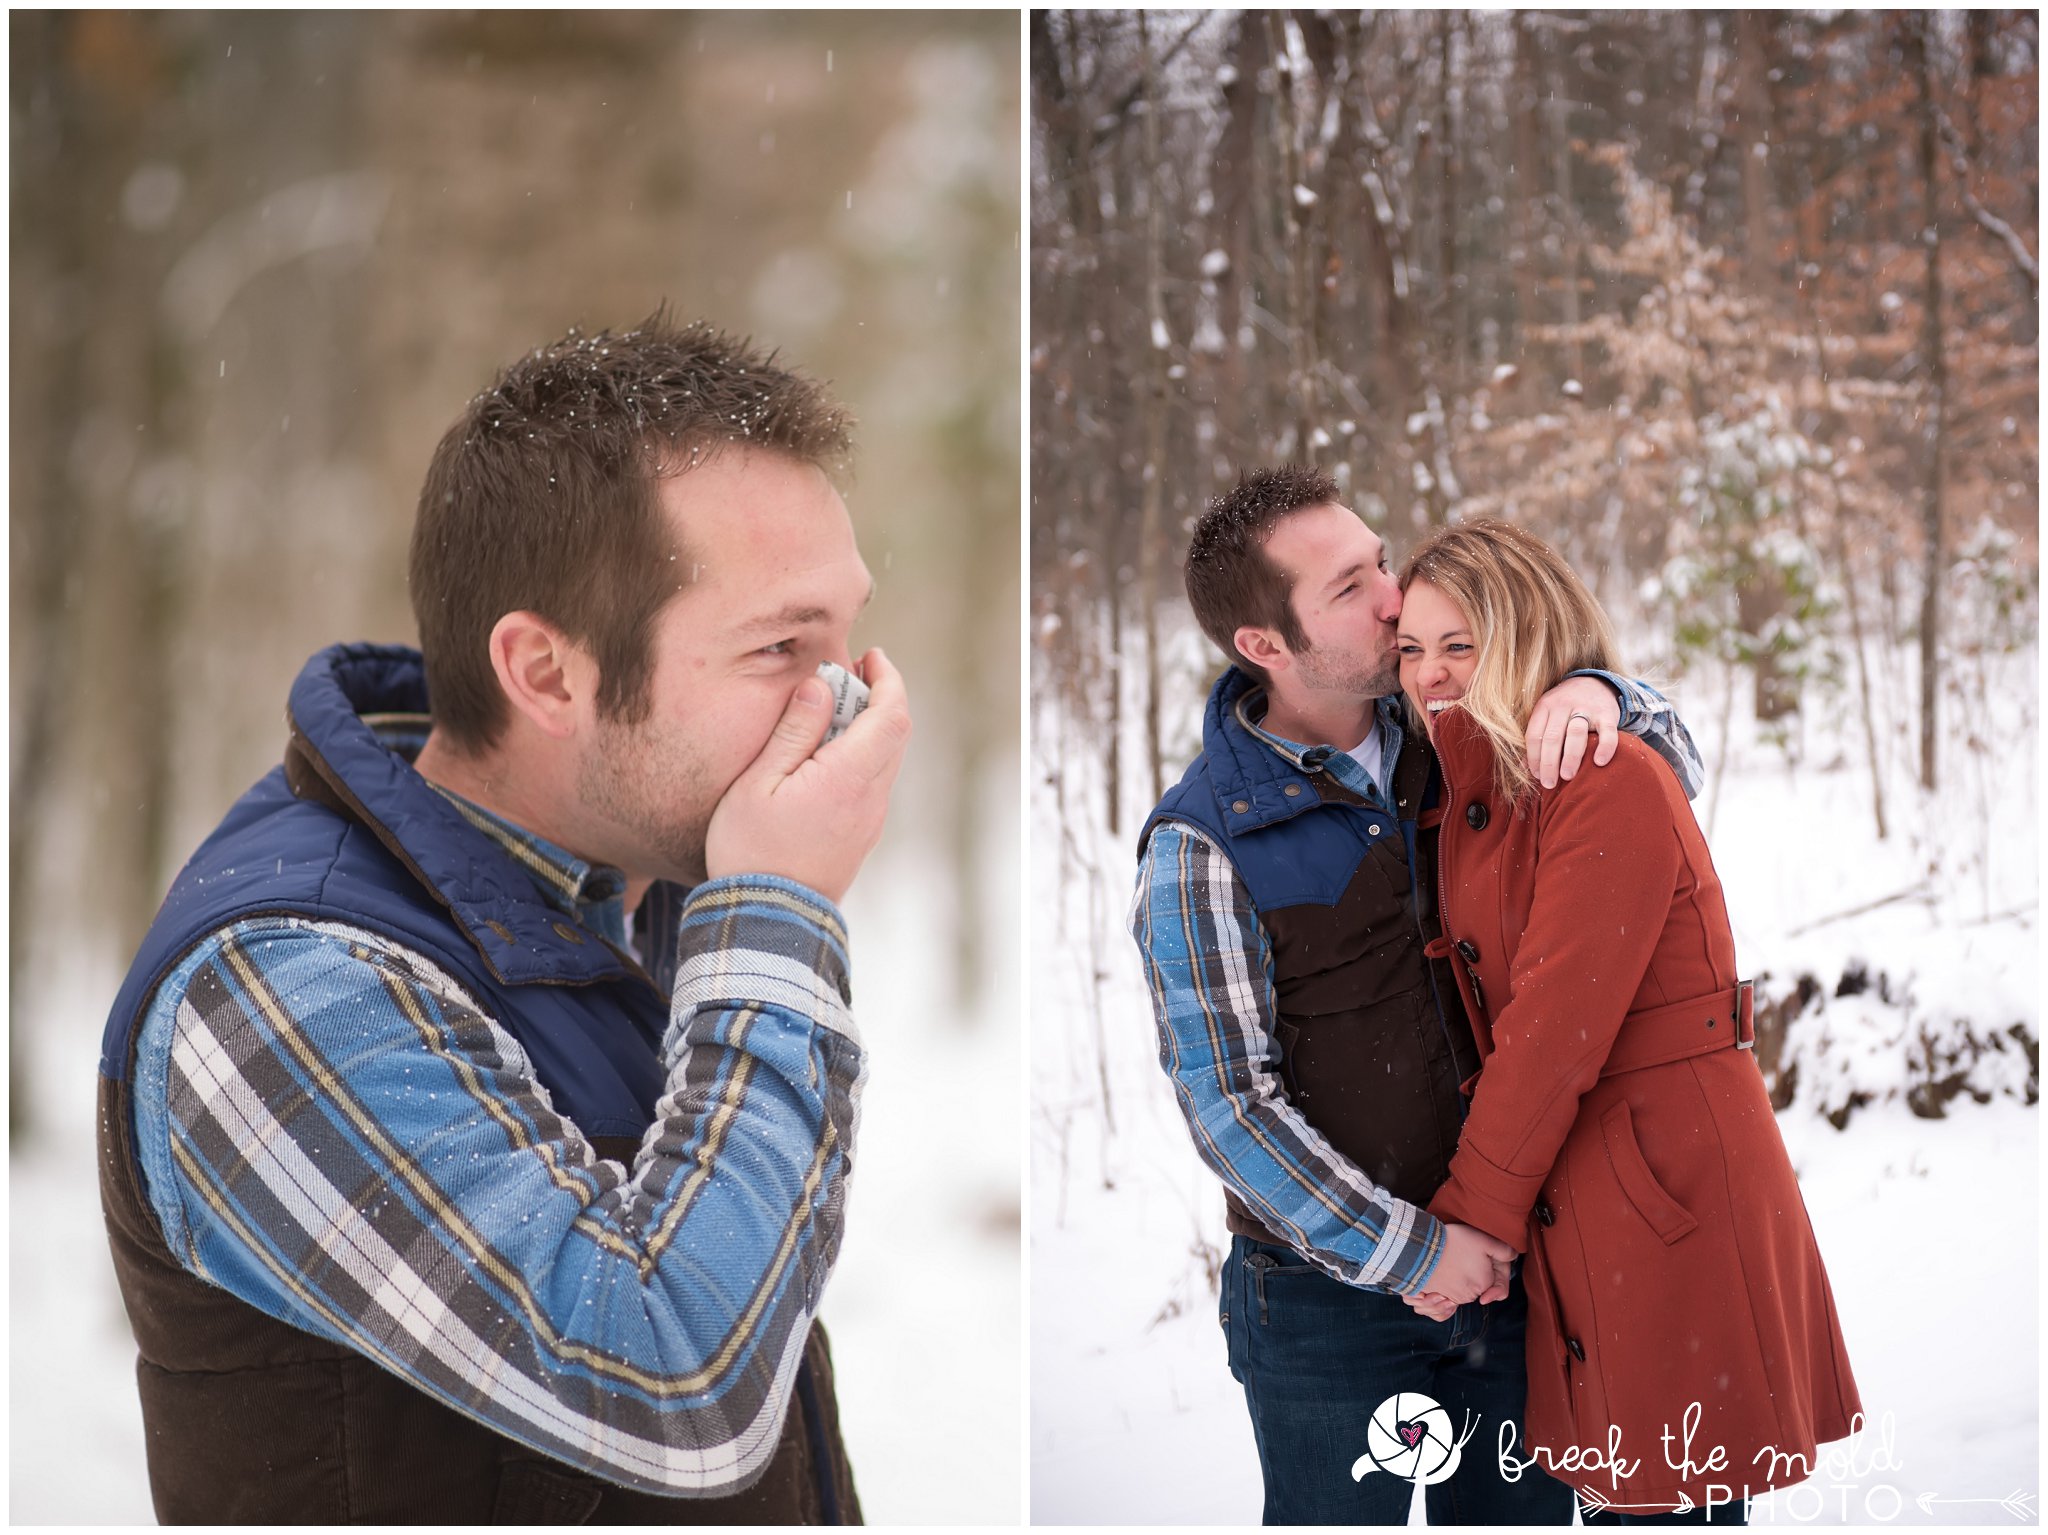 break-the-mold-photo-snowy-day-engagement-photos-knoxville-tn-tennessee-snow-day-pictures-winter-outdoor-unique-family_1500.jpg